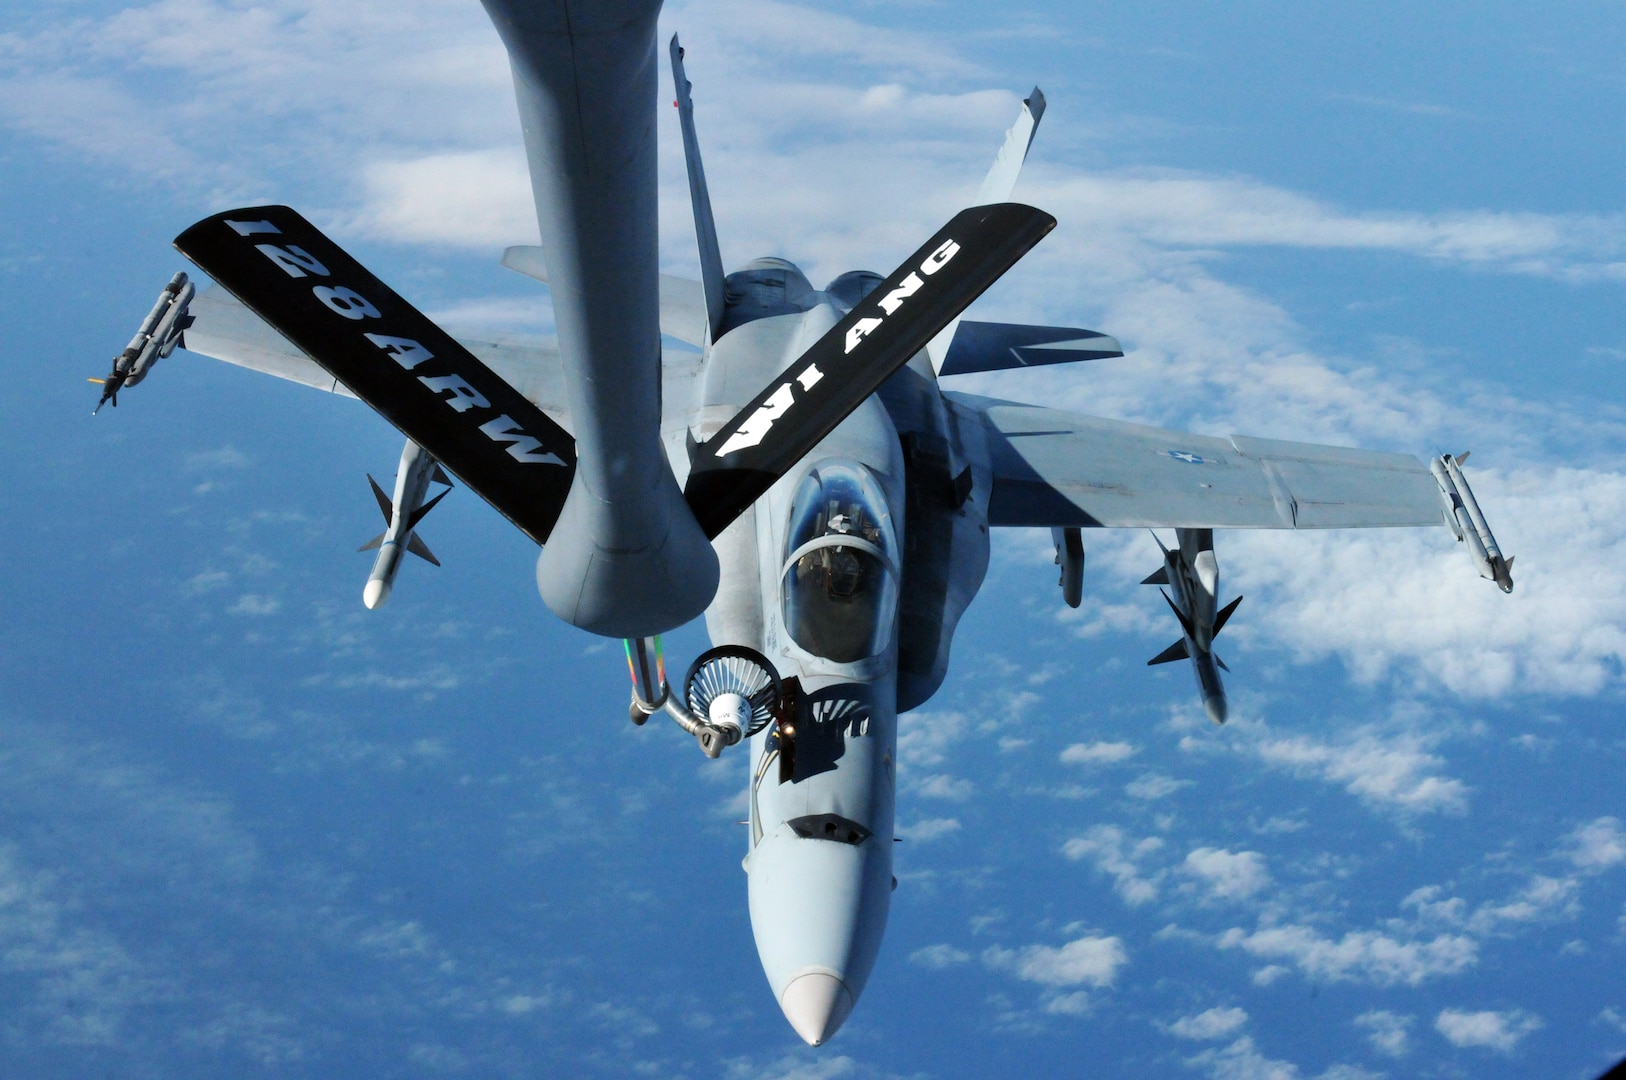 Crews from the Wisconsin Air National Guard's 128th Air Refueling Wing conduct an in-flight refuel with a Marine F-18 Hornet from the Marine Fighter Attack 314 out of Miramar, Calif., Jan. 12, 2012. The Marines served as adversaries to pilots of the Madison-based 115th Fighter Wing during simulated combat over the course of a two-week joint training exercise at Naval Air Station Key West, Fla.